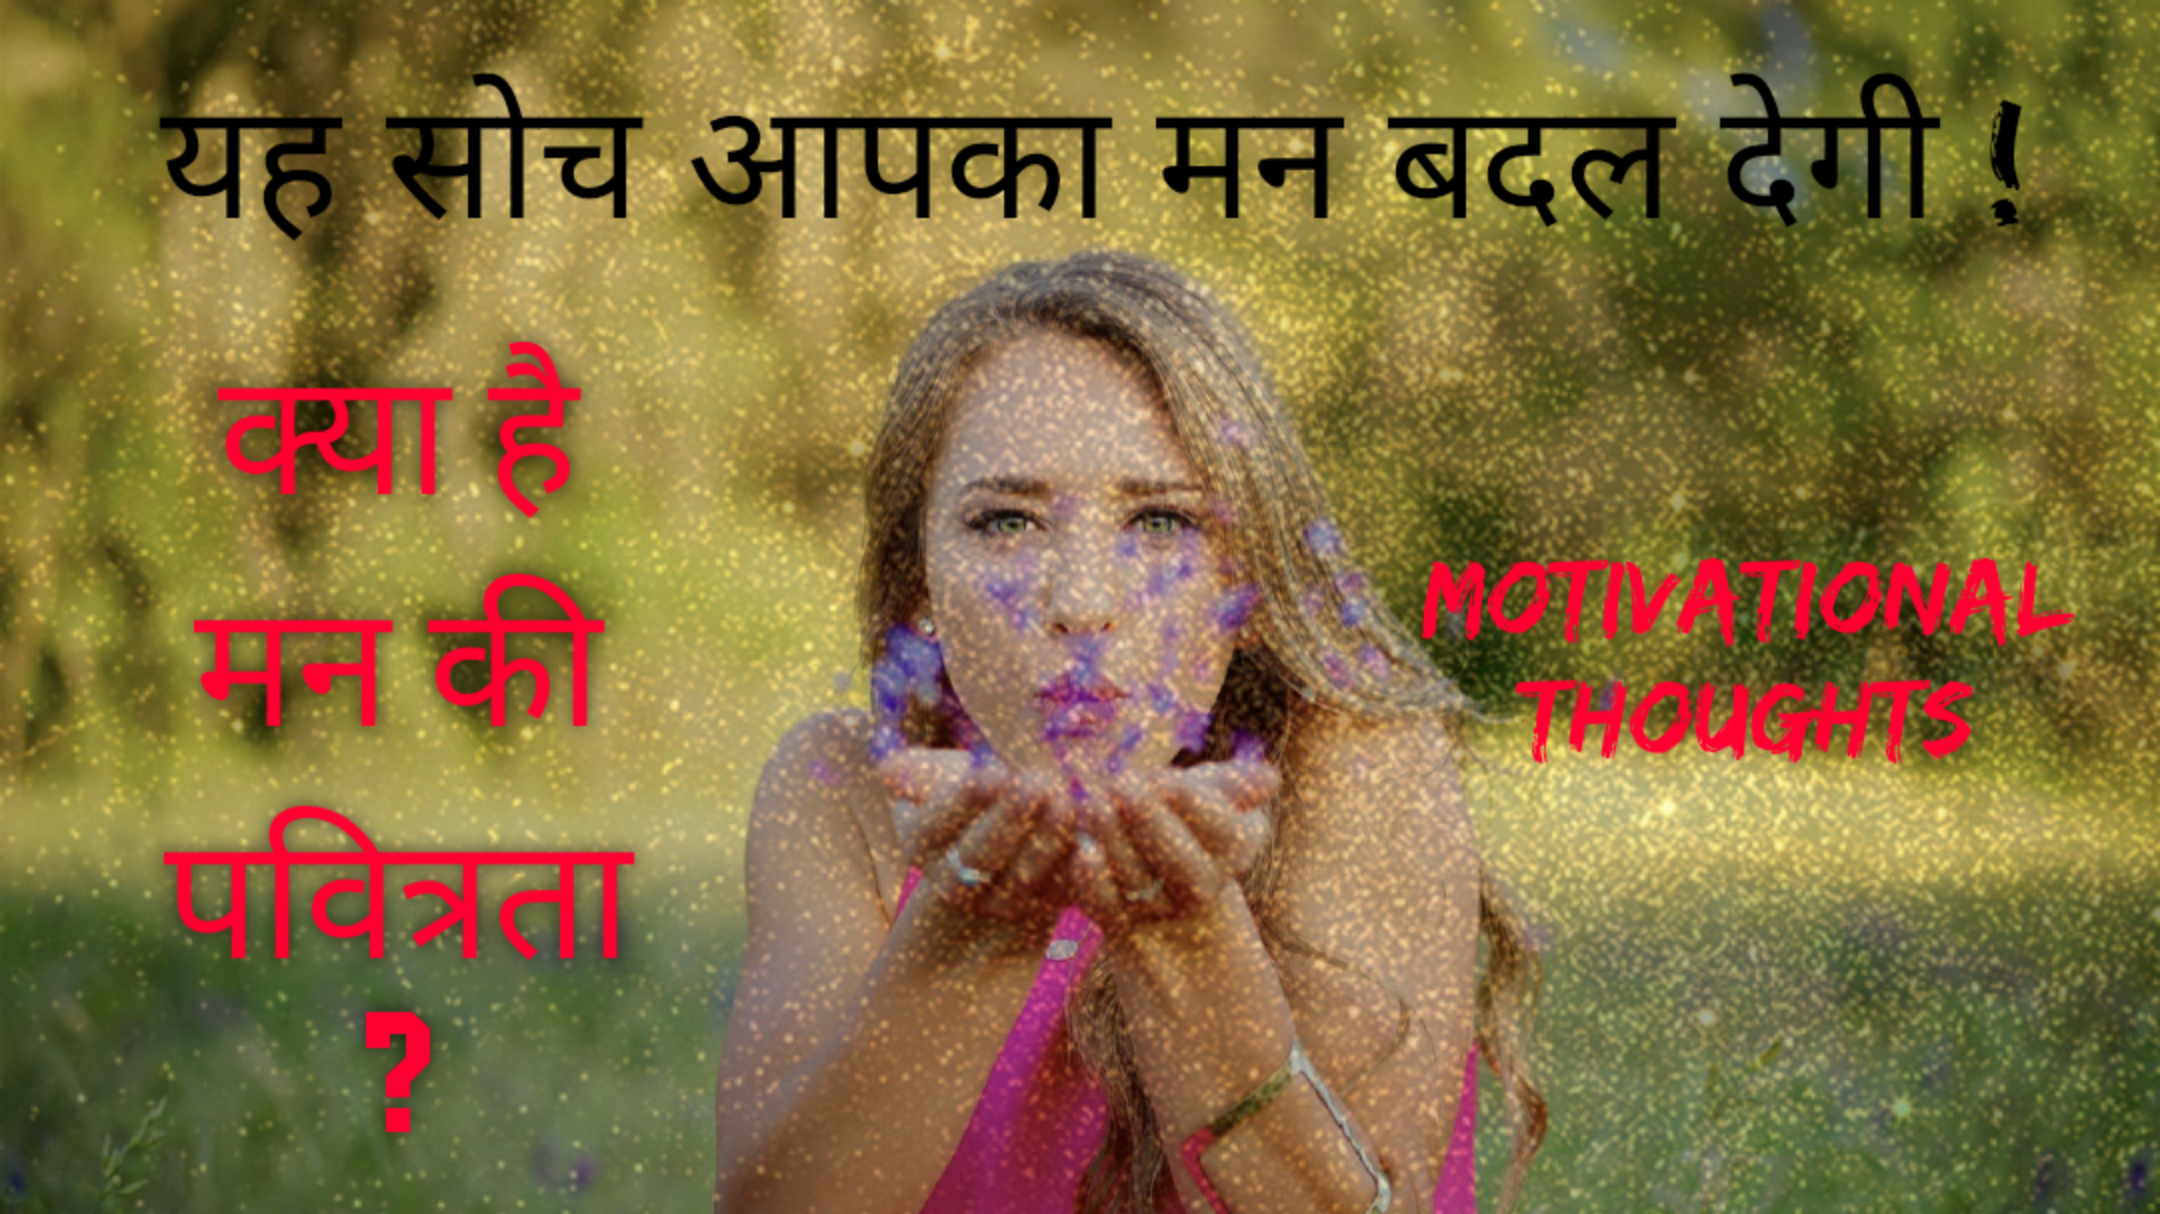 You are currently viewing Happiness is Free: मन को पवित्र कैसे रखें कि तन भी पवित्र हो जाए ?